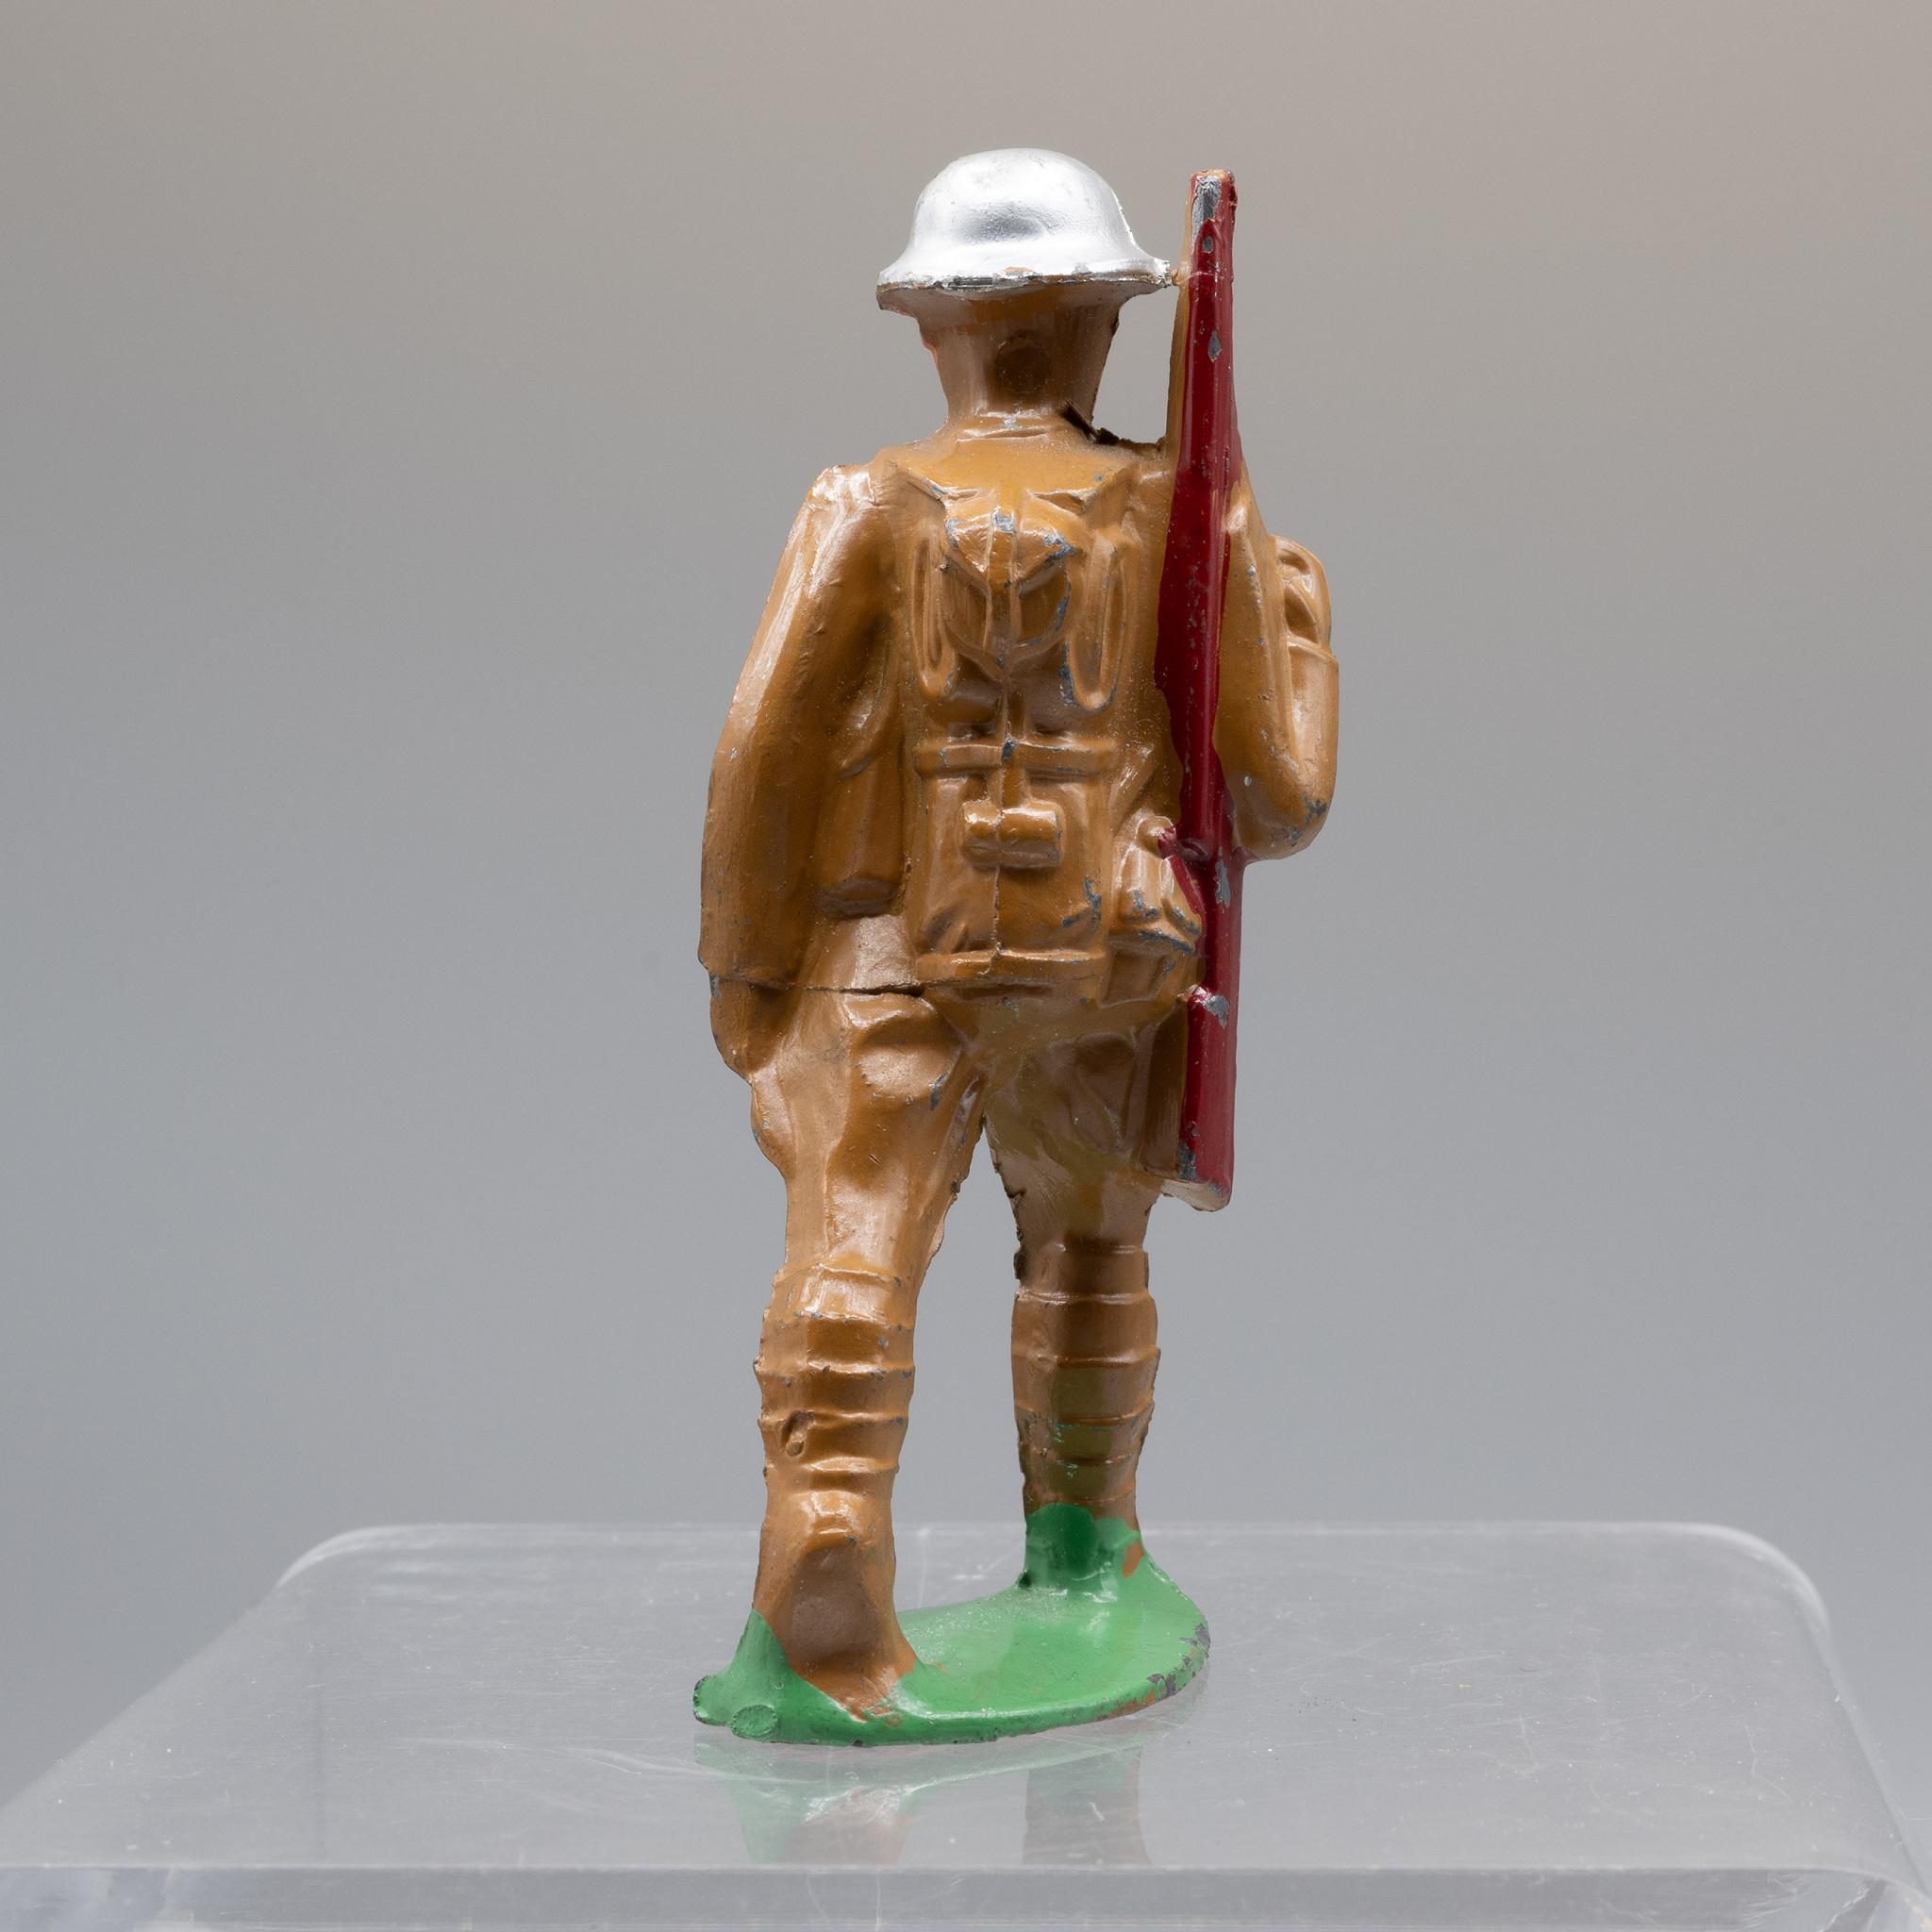 Manoil+Nbr+67+Soldier+Marching+with+Slung+Rifle+and+Pack picture 2